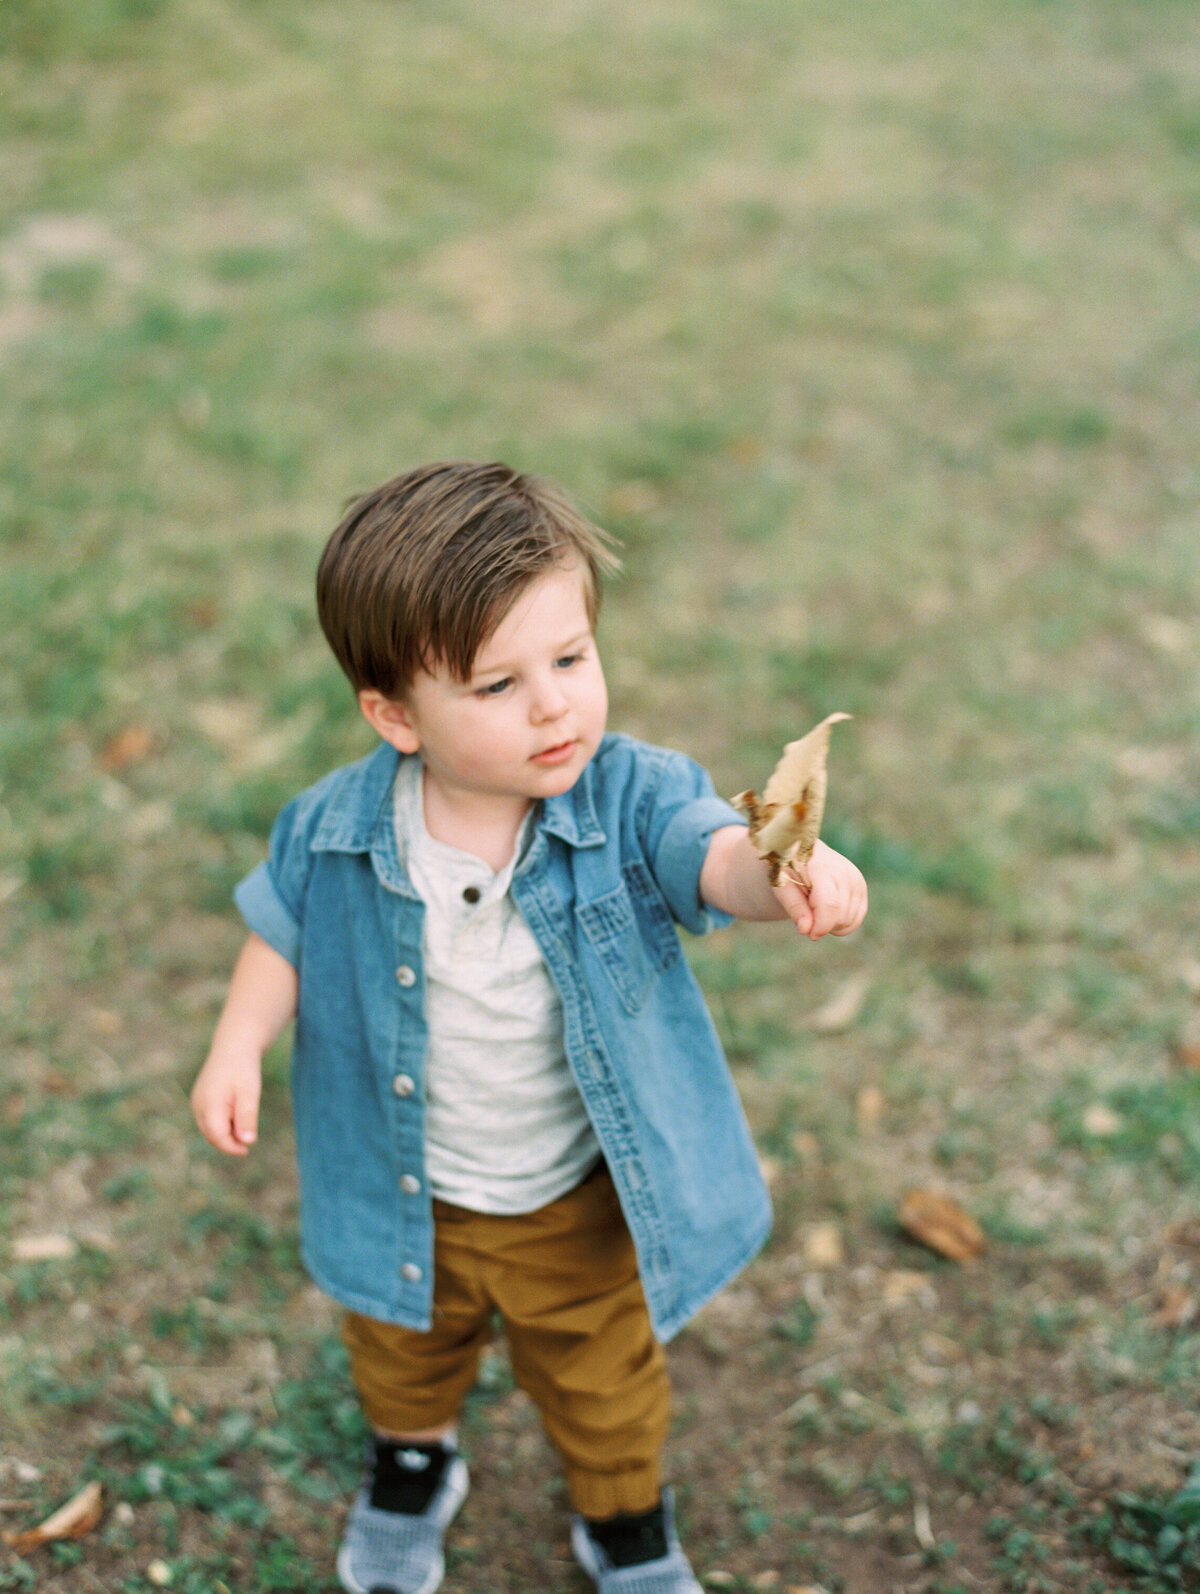 Little boy standing in the grass holding a brown leaf